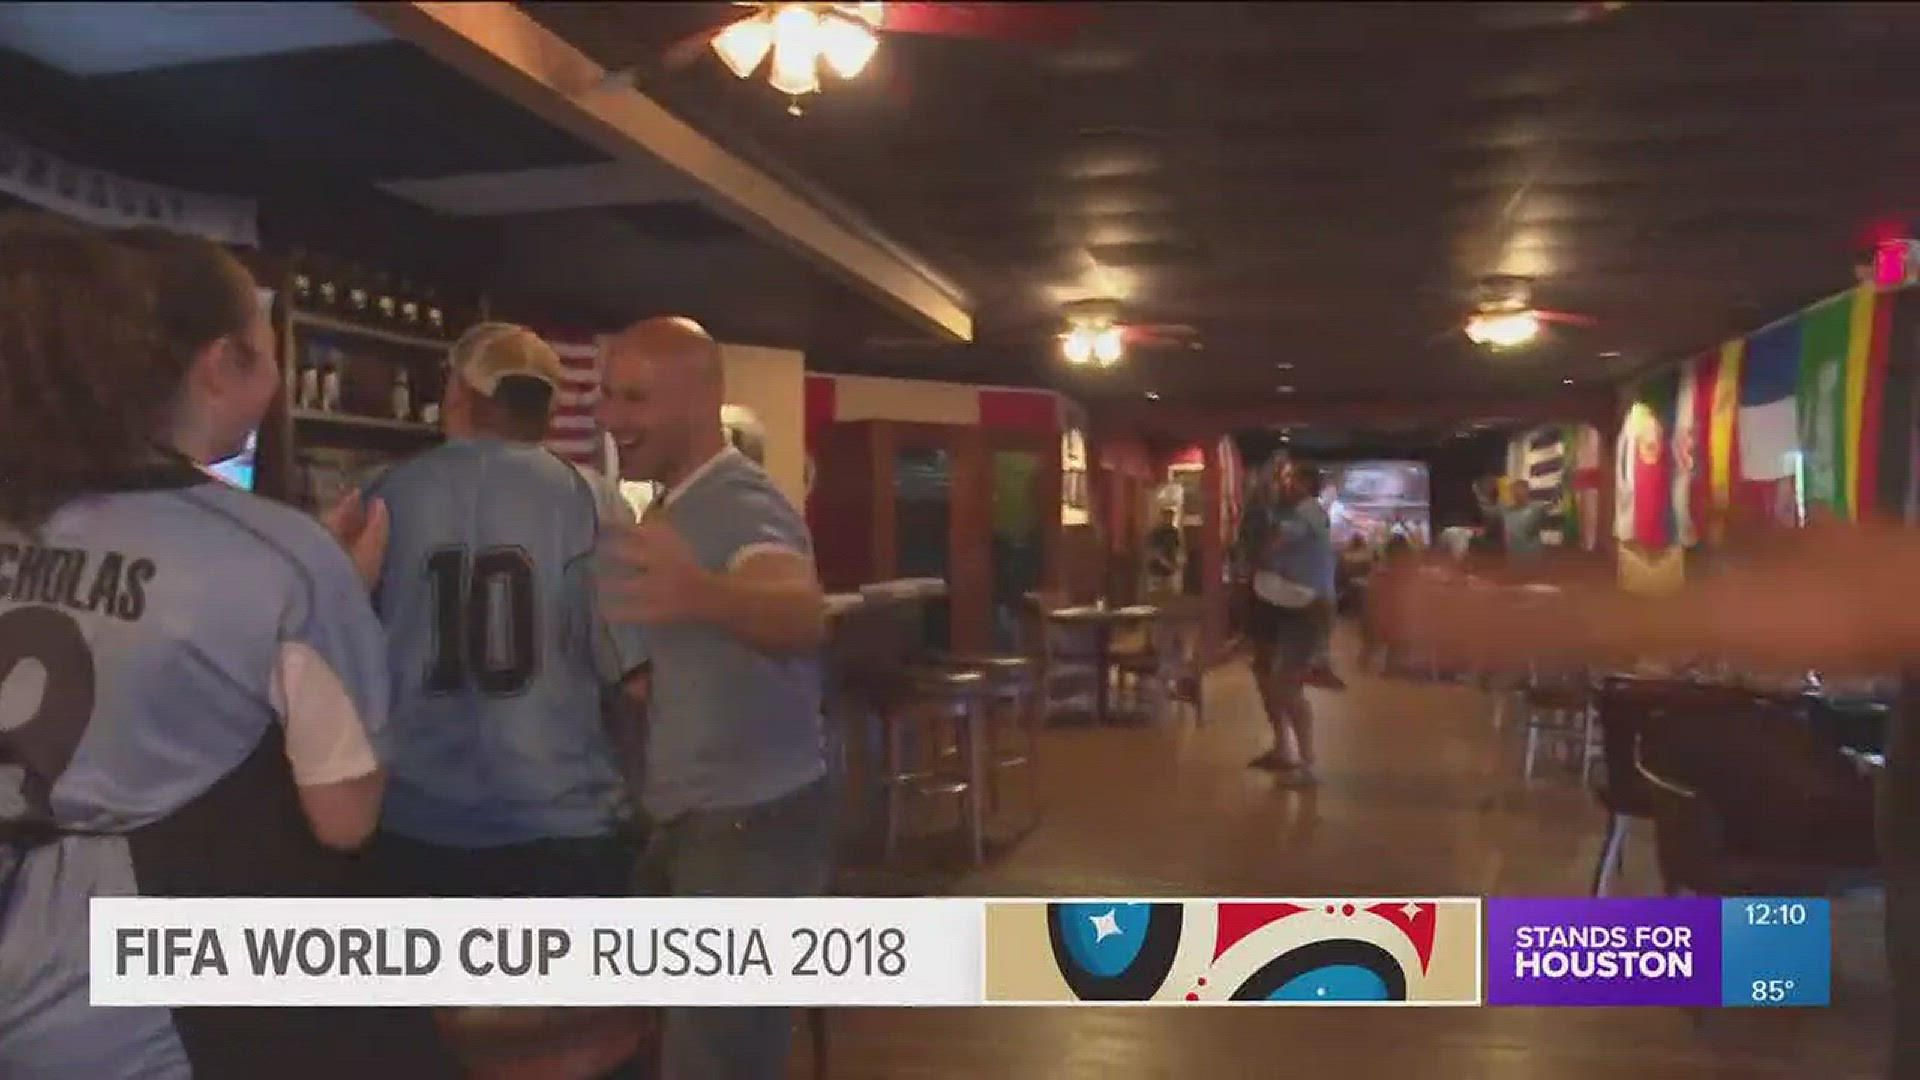 Some Houston bars and restaurants offer World Cup fans a chance to watch the matches this week, including at Saldiva's South American Grill.